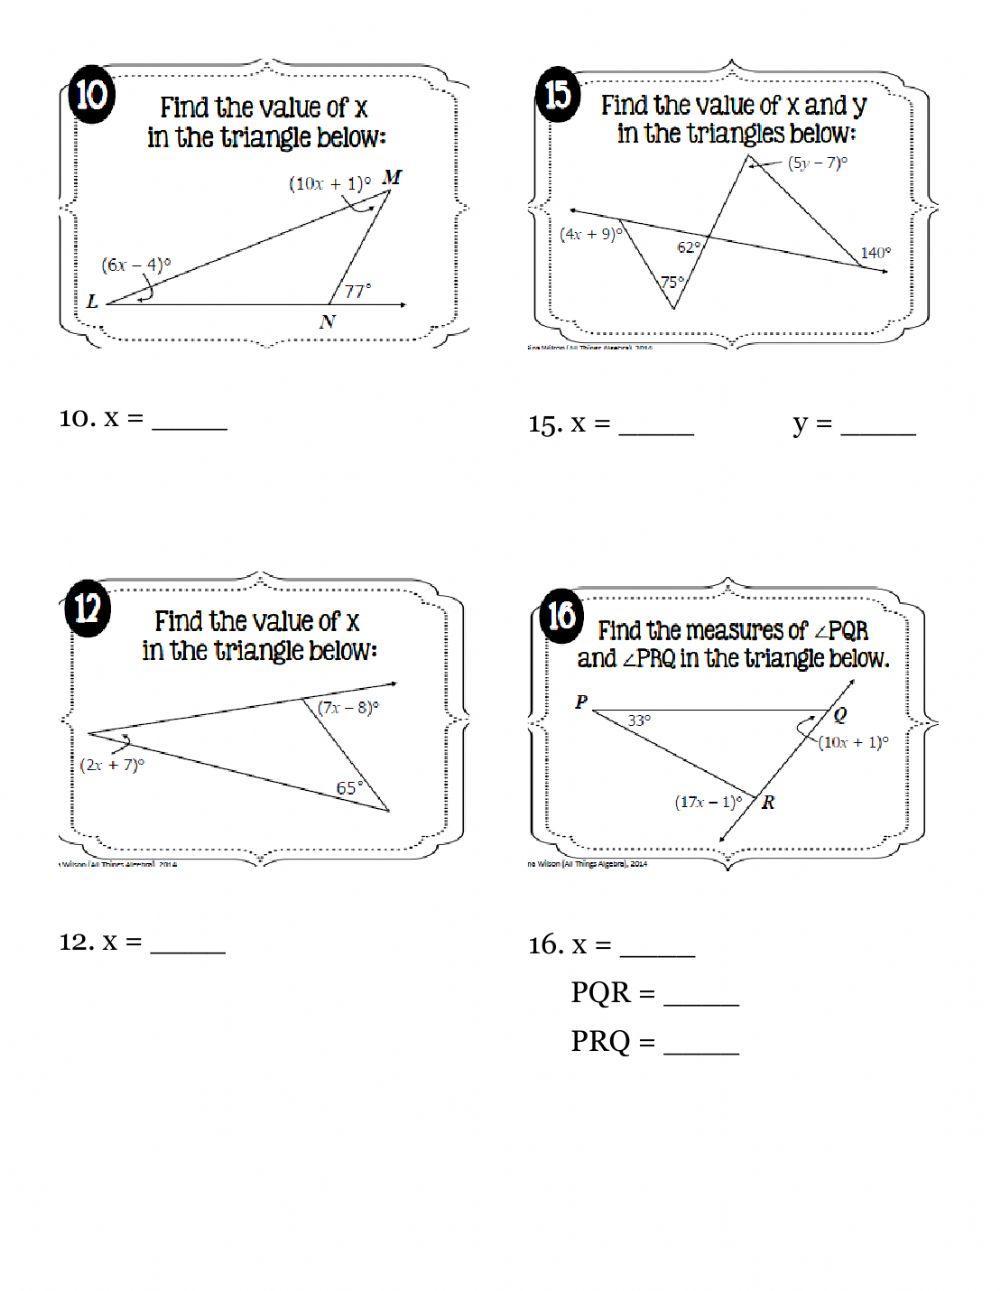 Exterior Angles of Triangles with Algebra